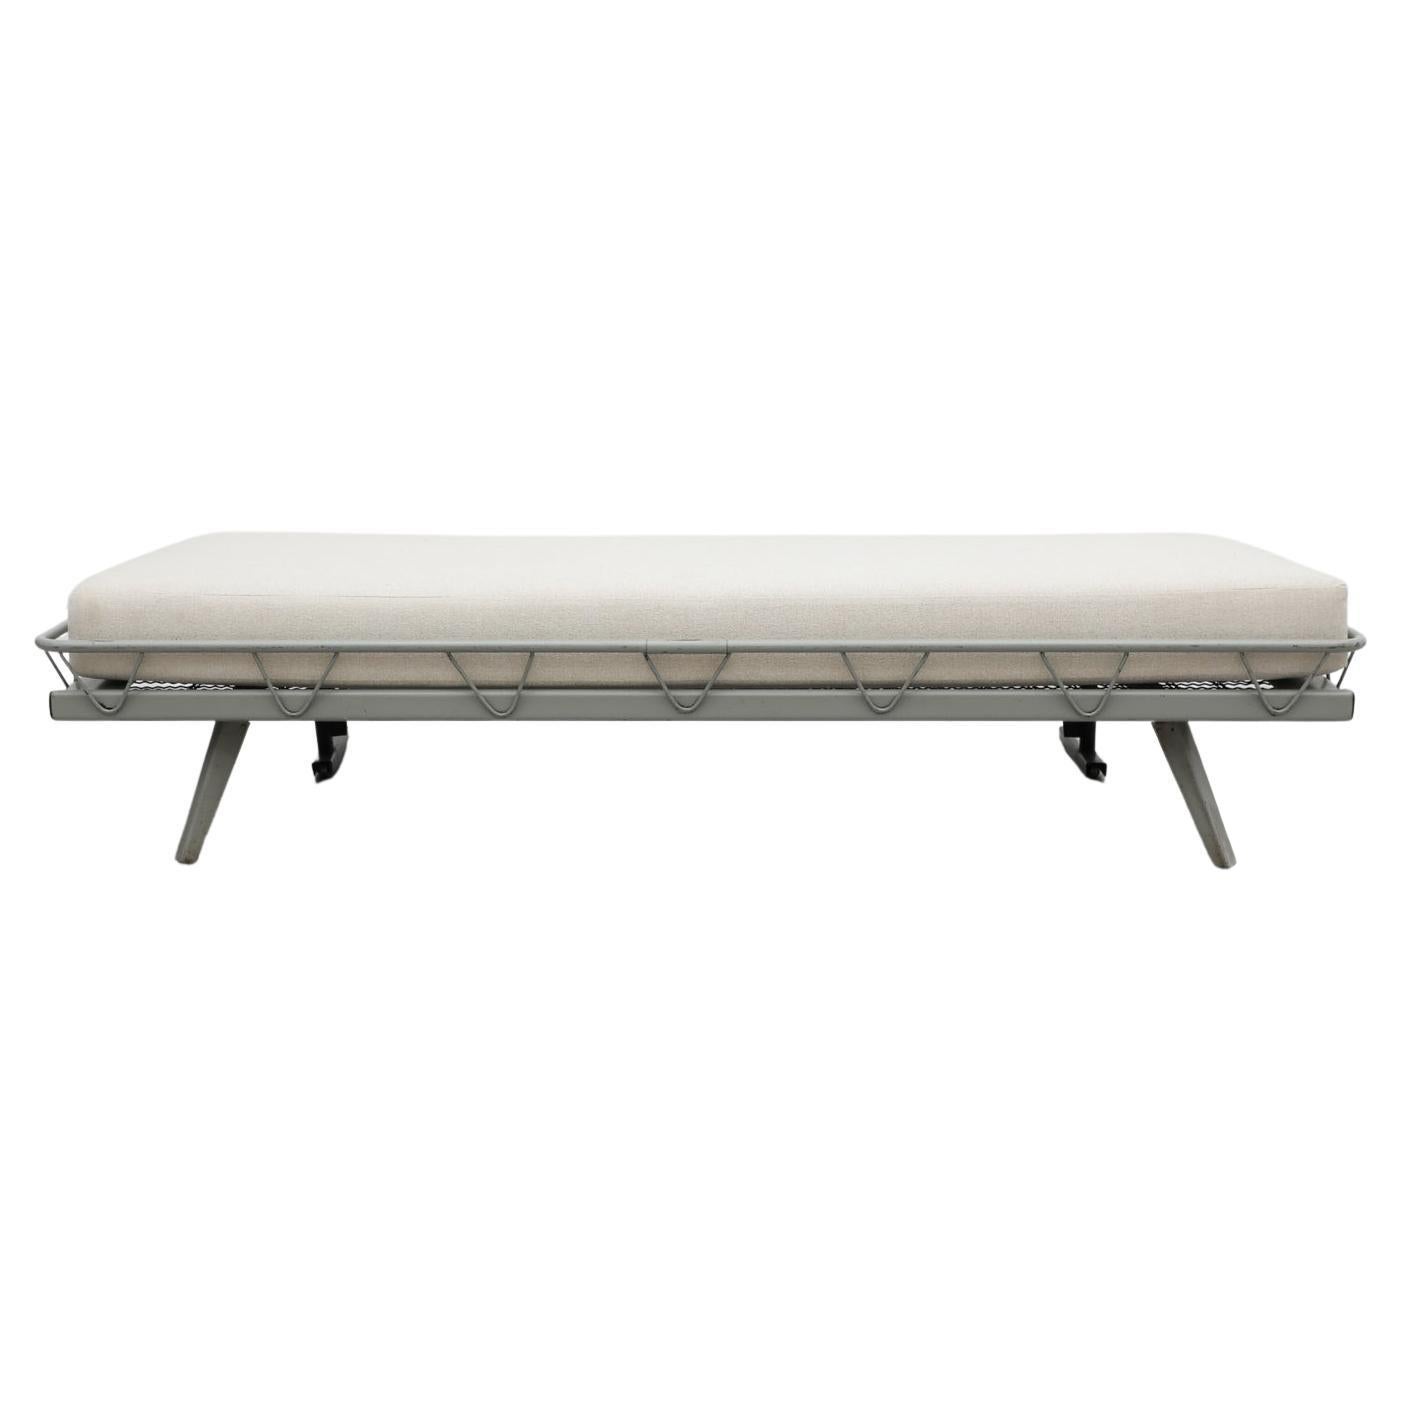 Rare Mid Century Wim Rietveld Metal  "Fold-Up" Arielle Daybed for Auping, 1953 For Sale